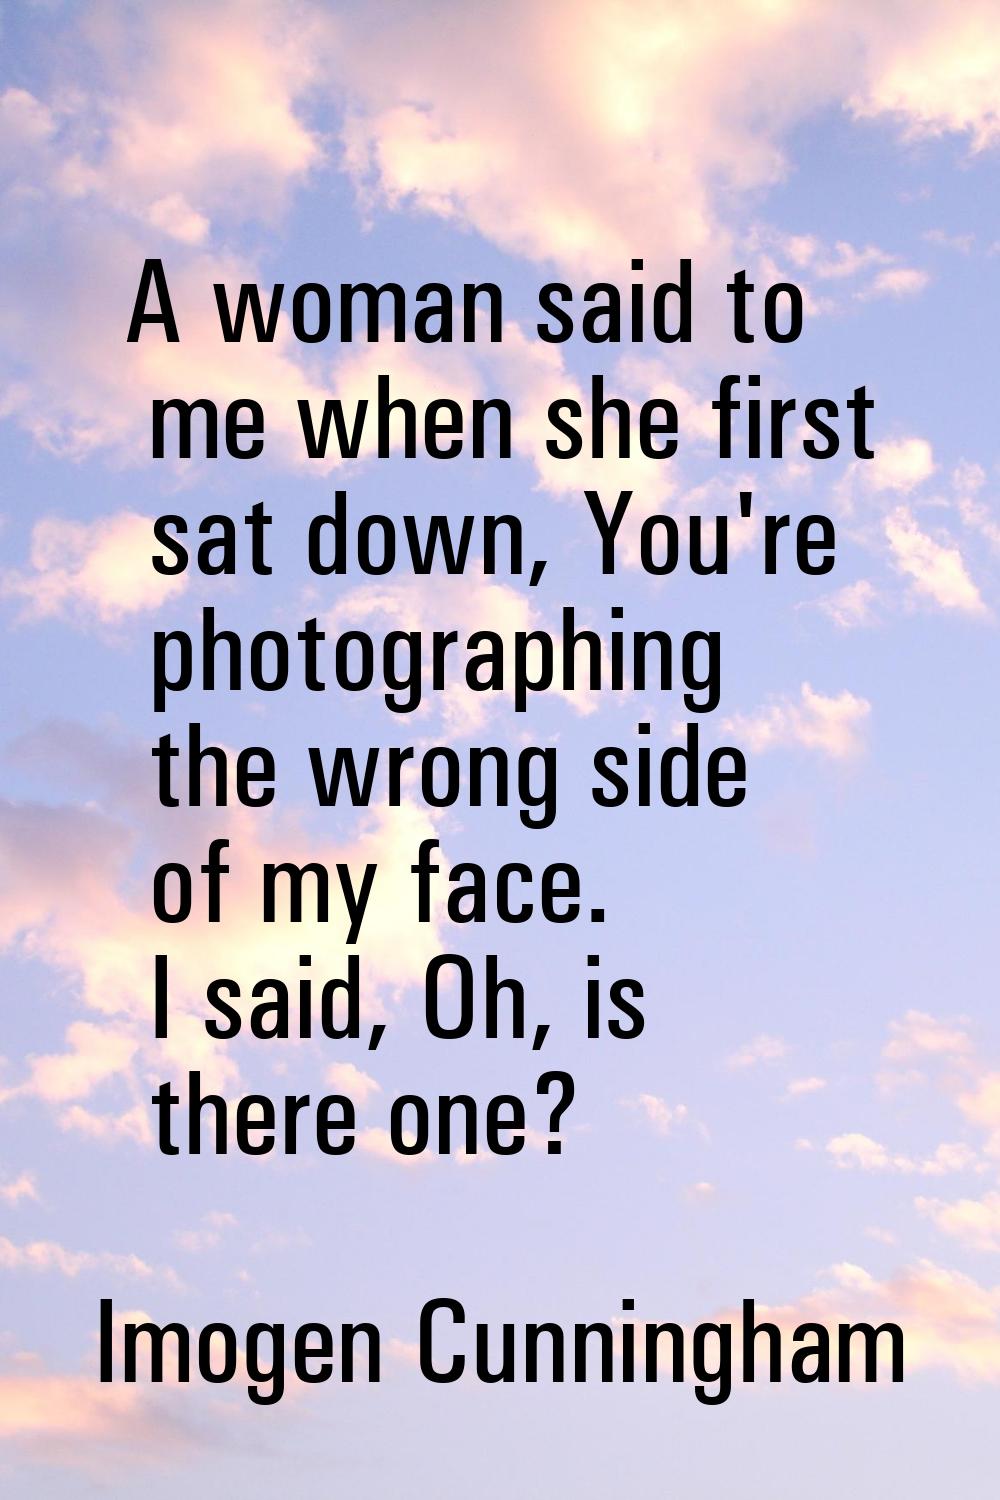 A woman said to me when she first sat down, You're photographing the wrong side of my face. I said,